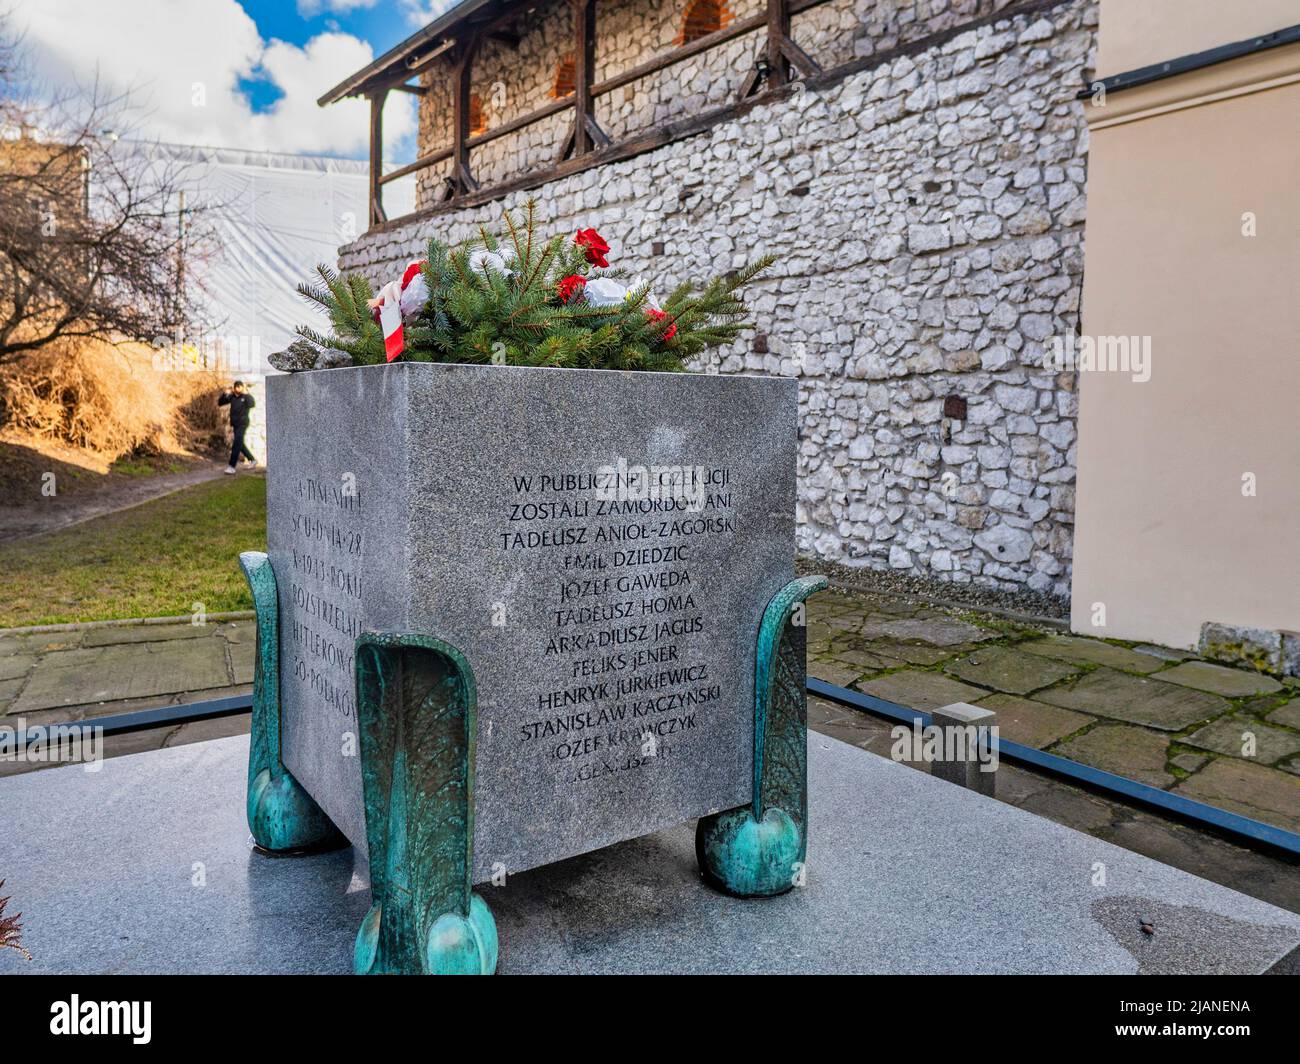 monument located in front of the Old Synagogue on Szeroka Street, commemorating a crime from the Second World War. Stock Photo